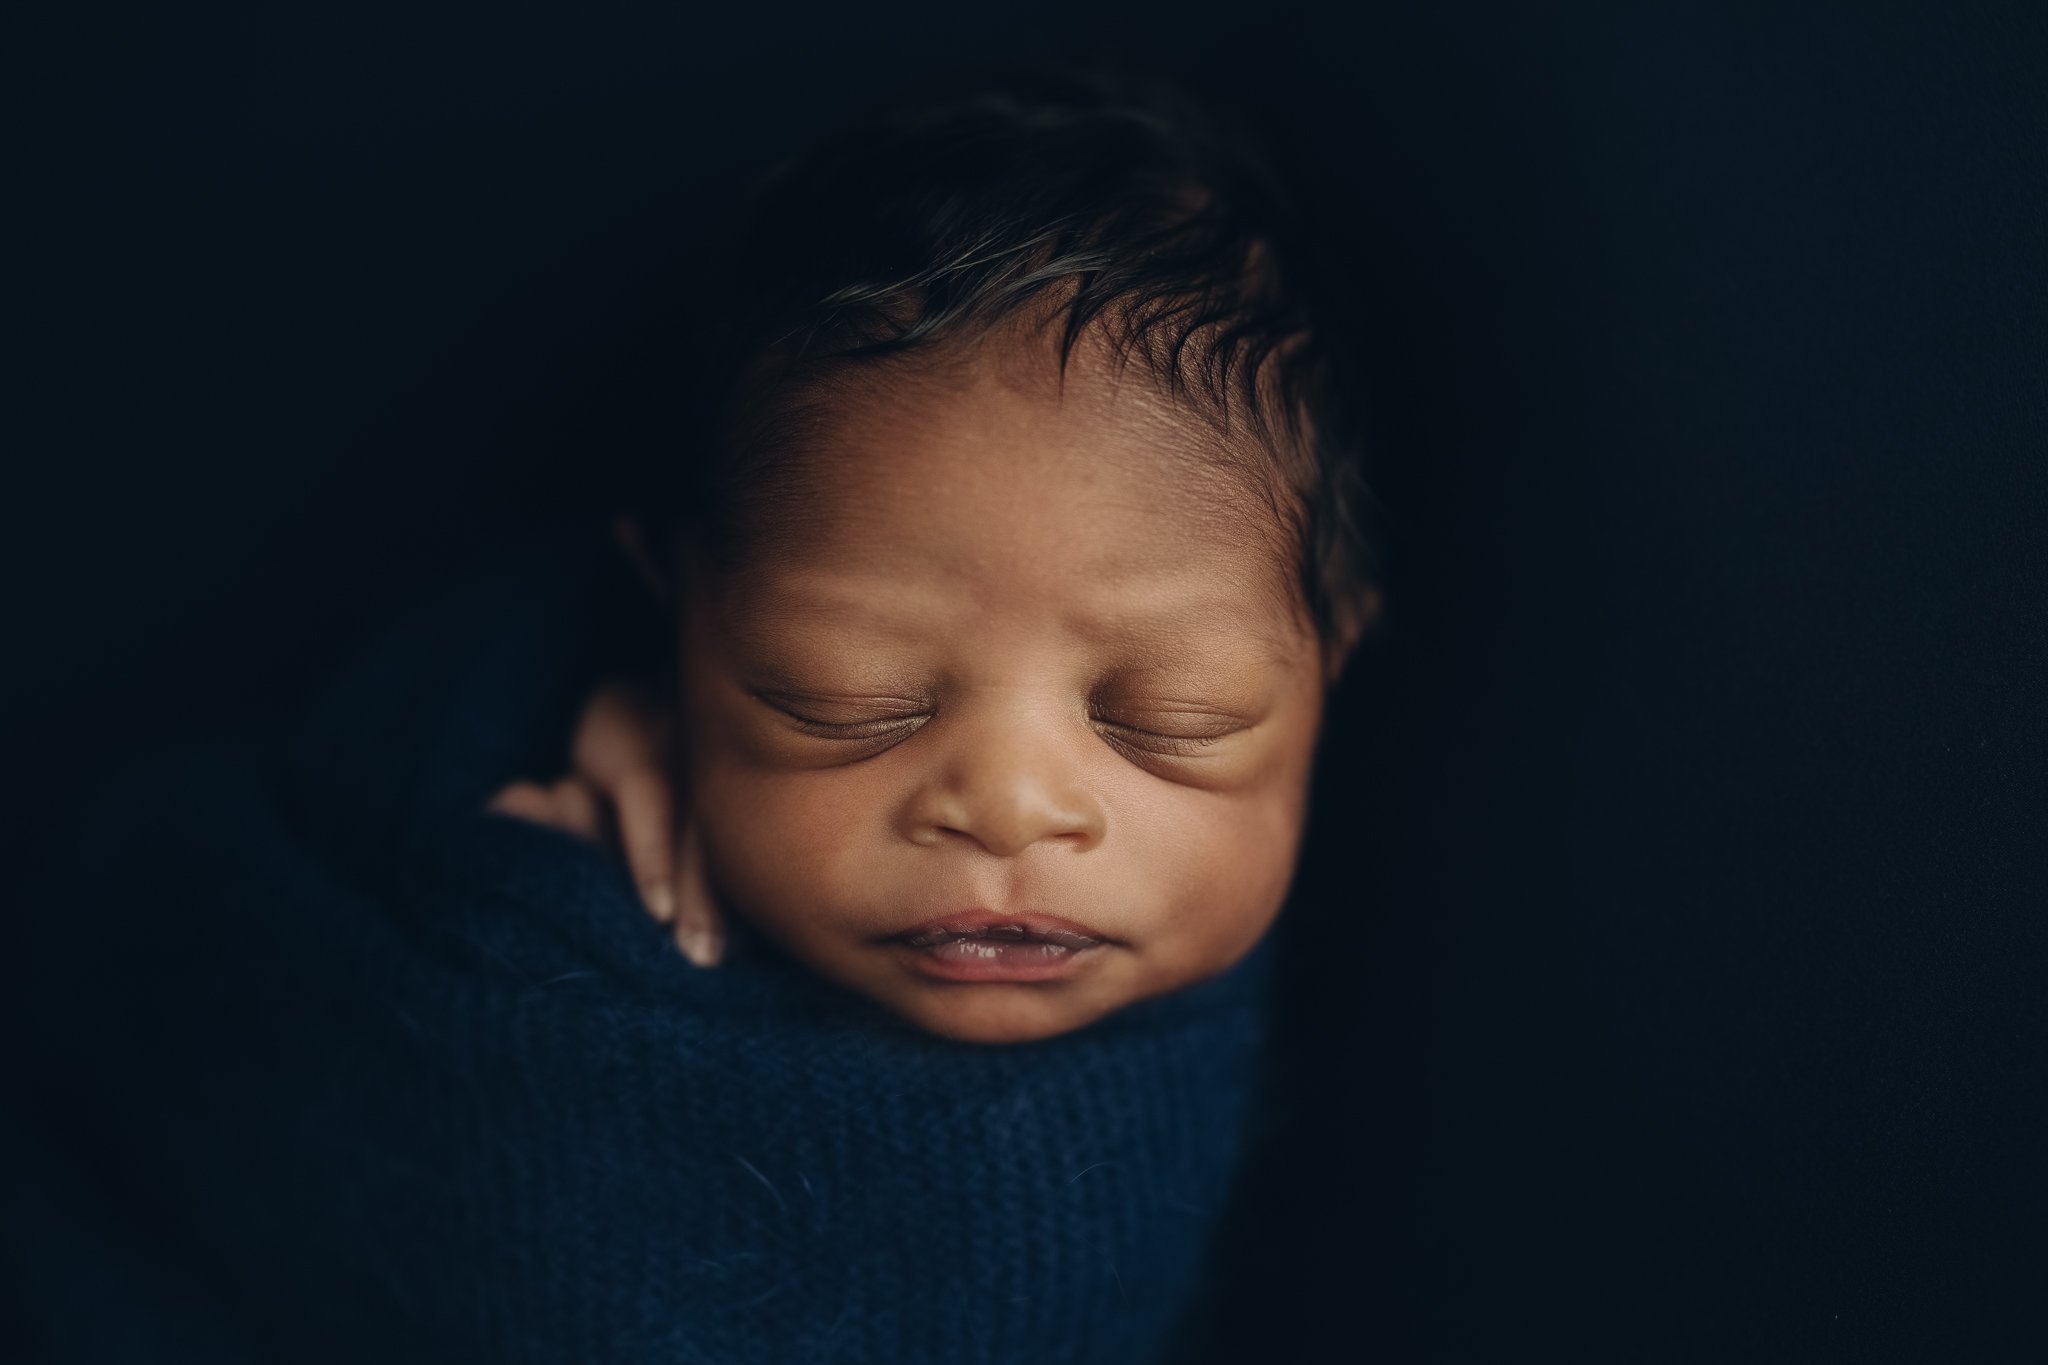 Posed_Studio_Newborn_Photographer_Second_Child_Siblings_Baby_Boy_Navy_Mustard_by_Christie_Leigh_Photo_Champion_OH_Ohio_Trumbull_County-10.jpg